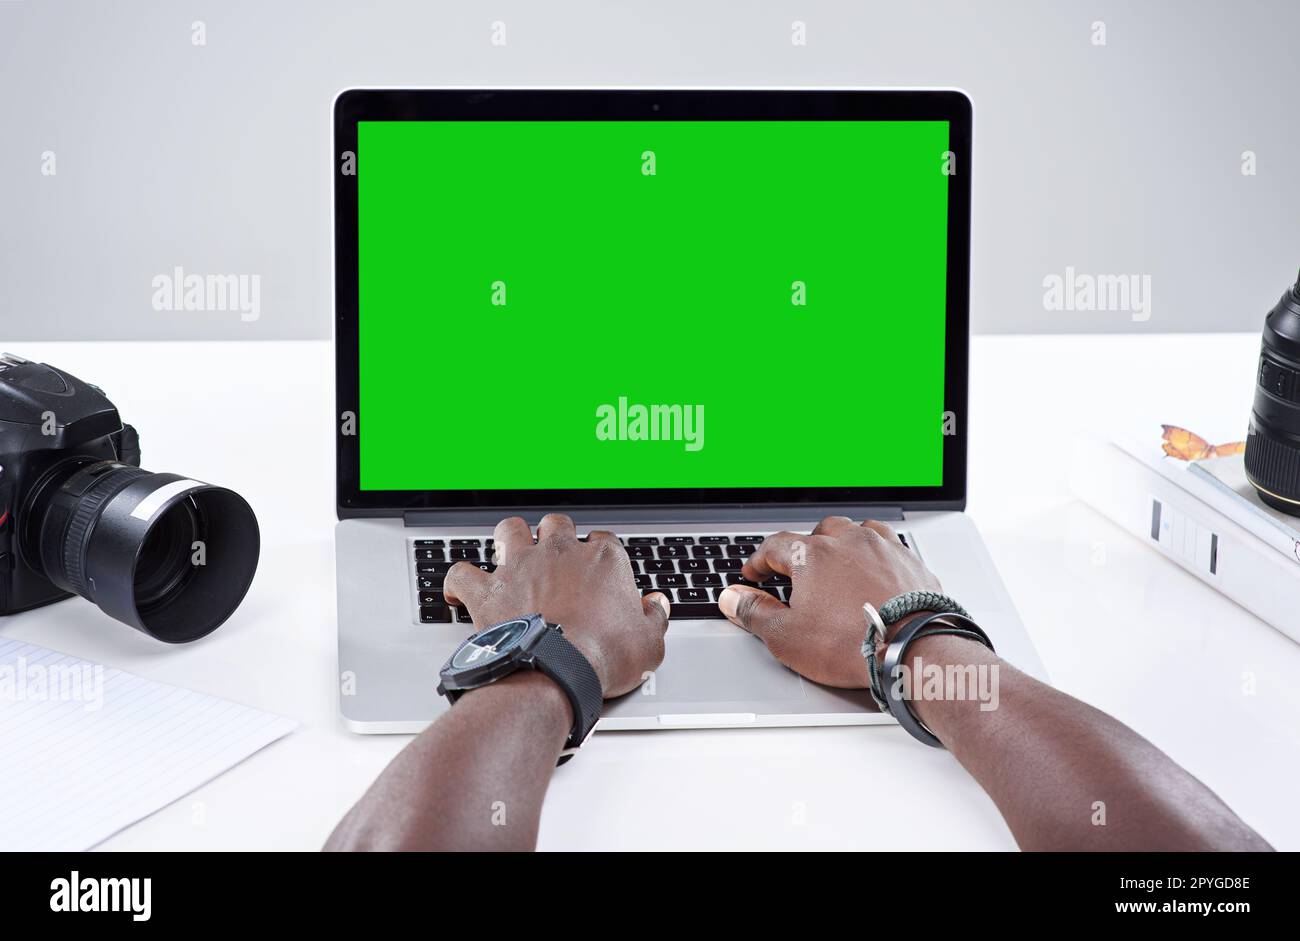 Blog about your passion. a person using a laptop with a green screen. Stock Photo